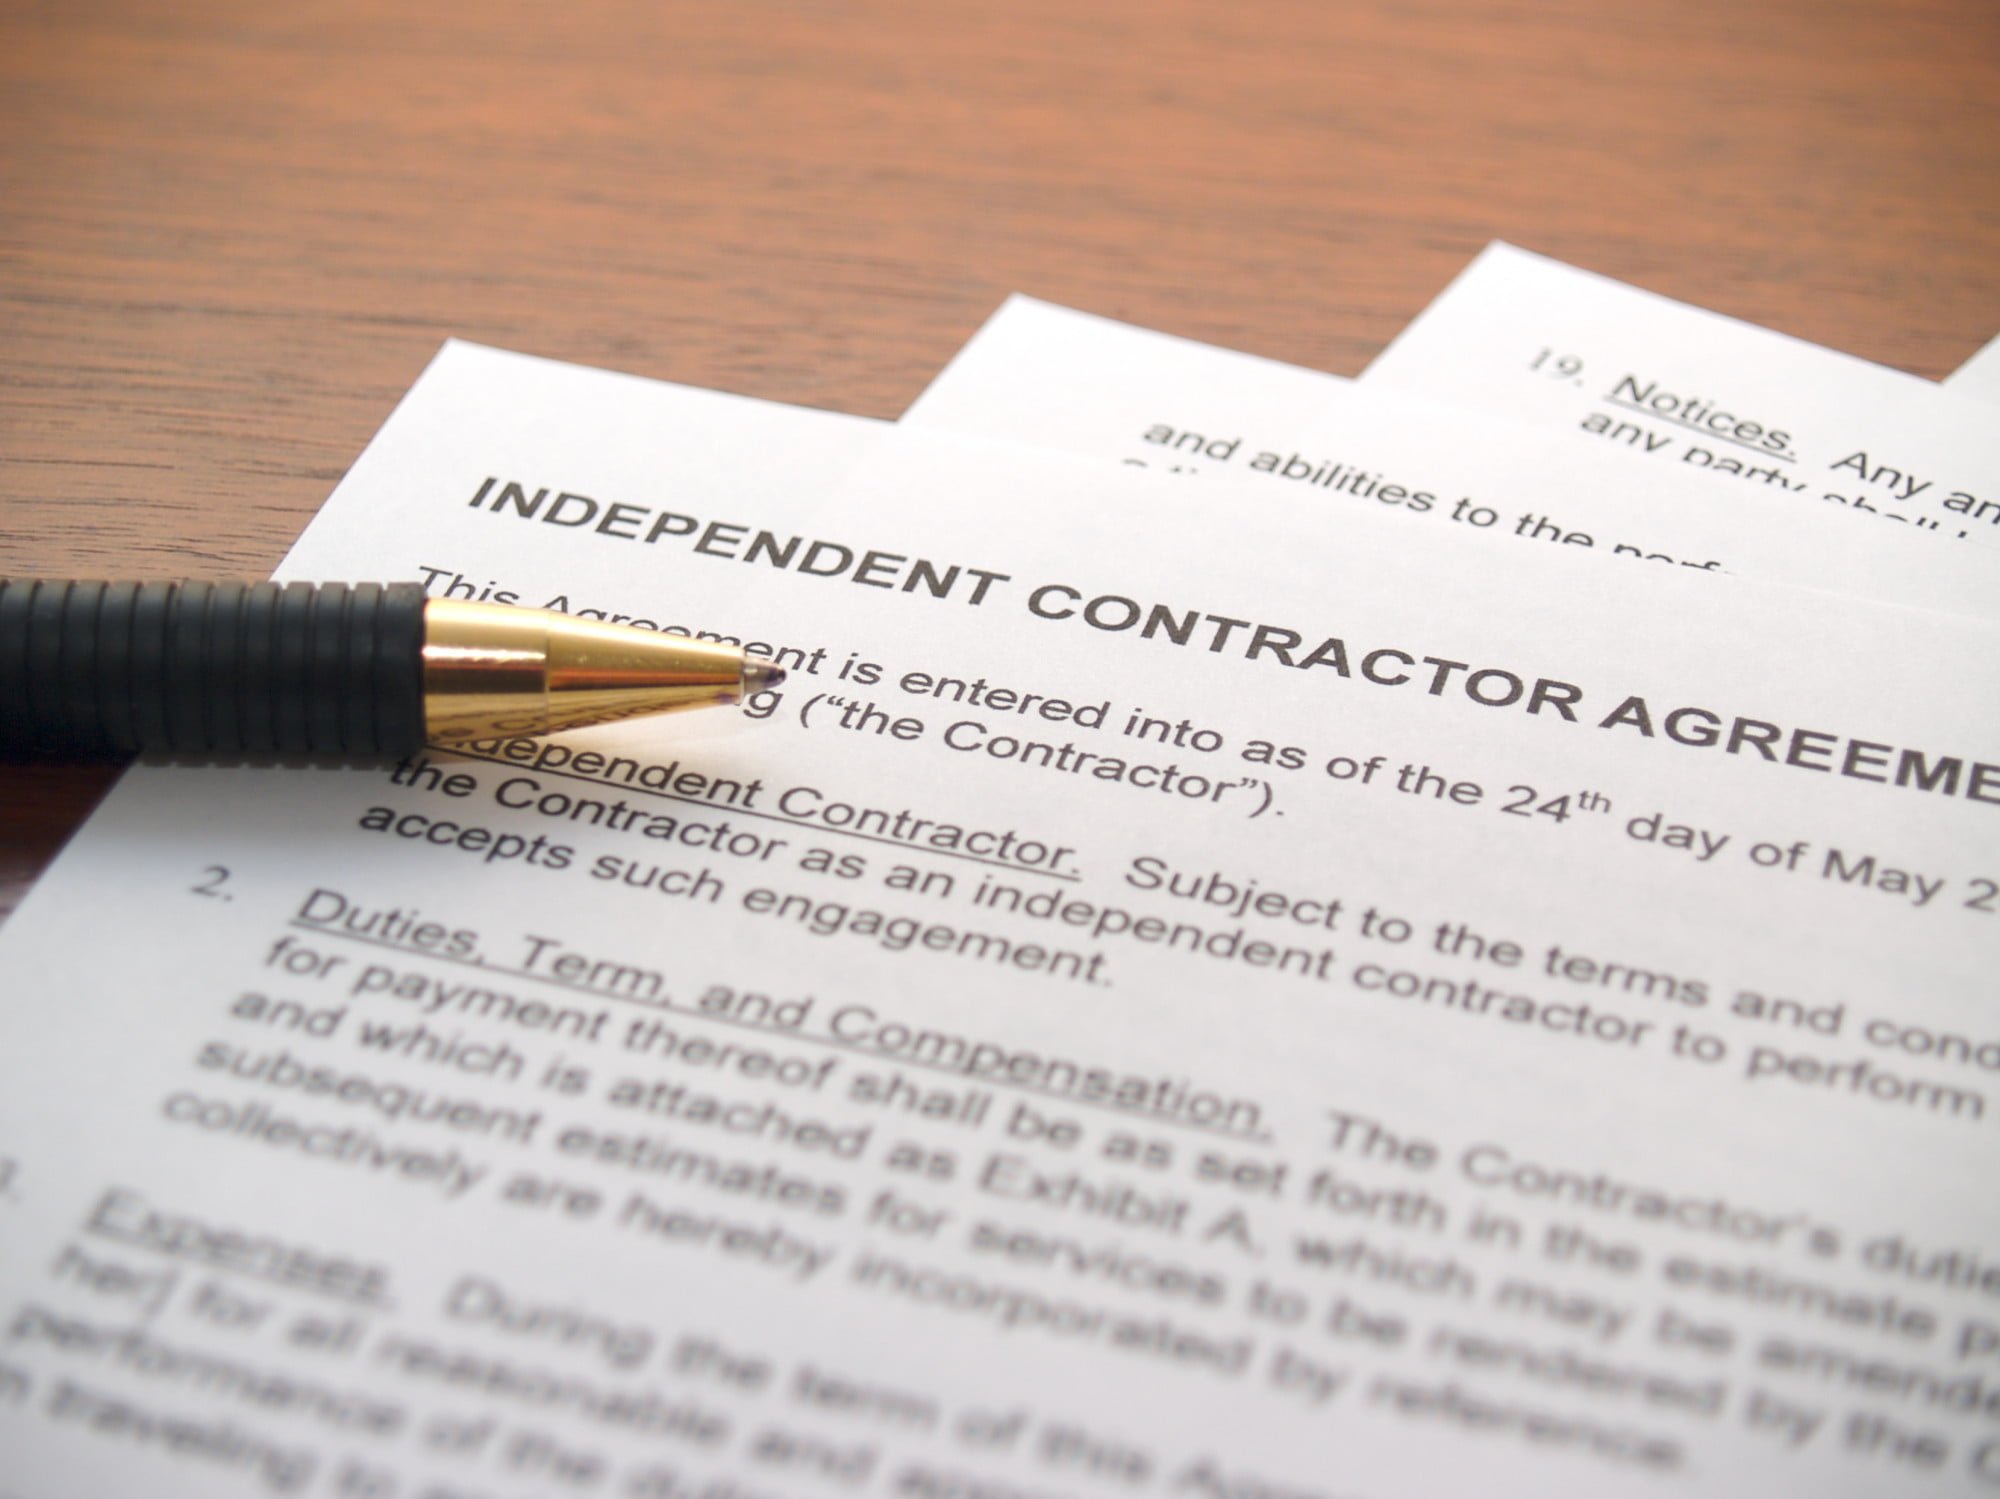 Are you interested in becoming a contractor? Click here for five practical tips for becoming a contractor that are guaranteed to help you along the way.